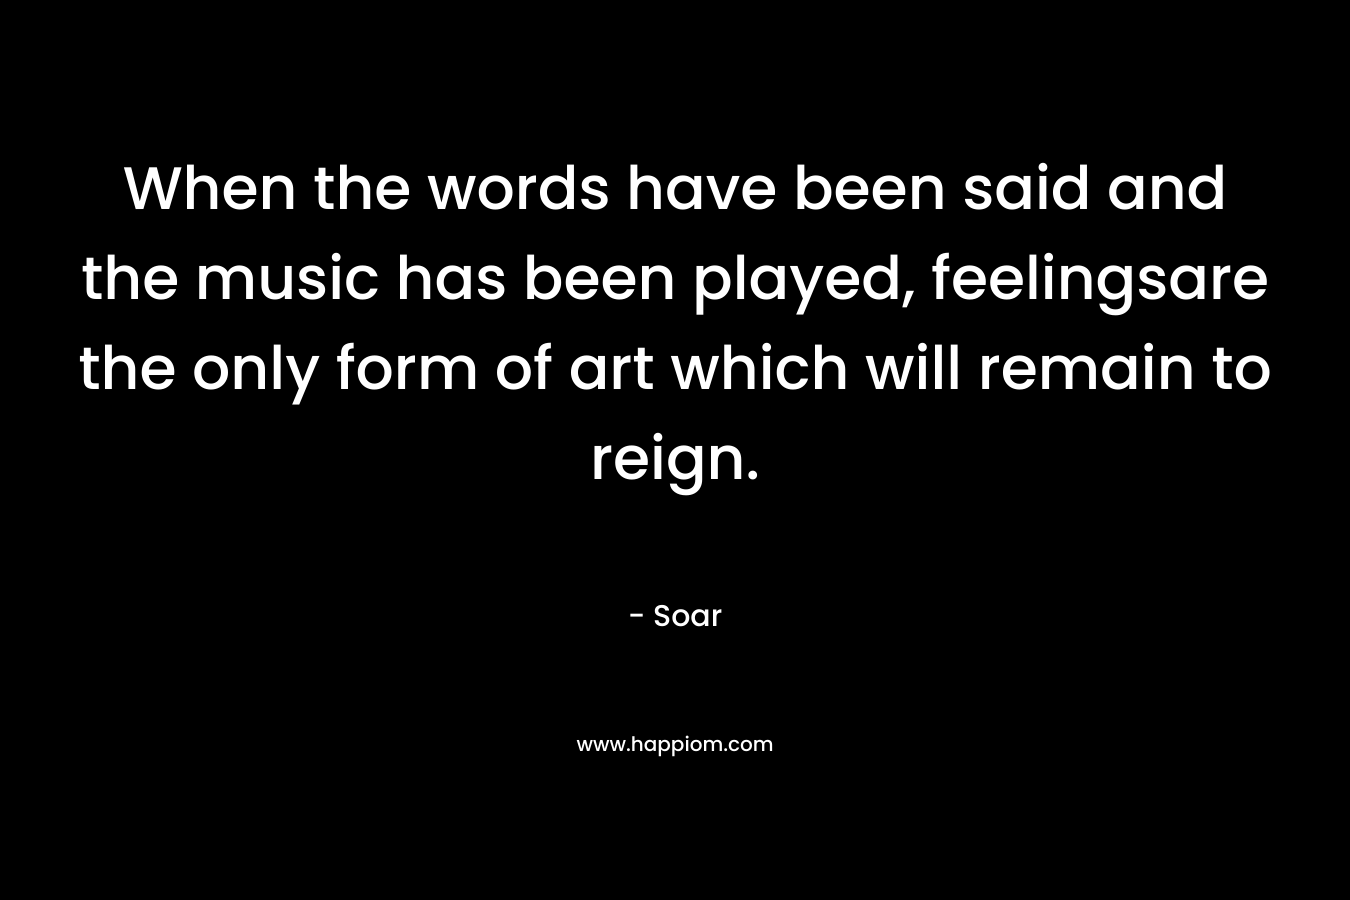 When the words have been said and the music has been played, feelingsare the only form of art which will remain to reign. – Soar